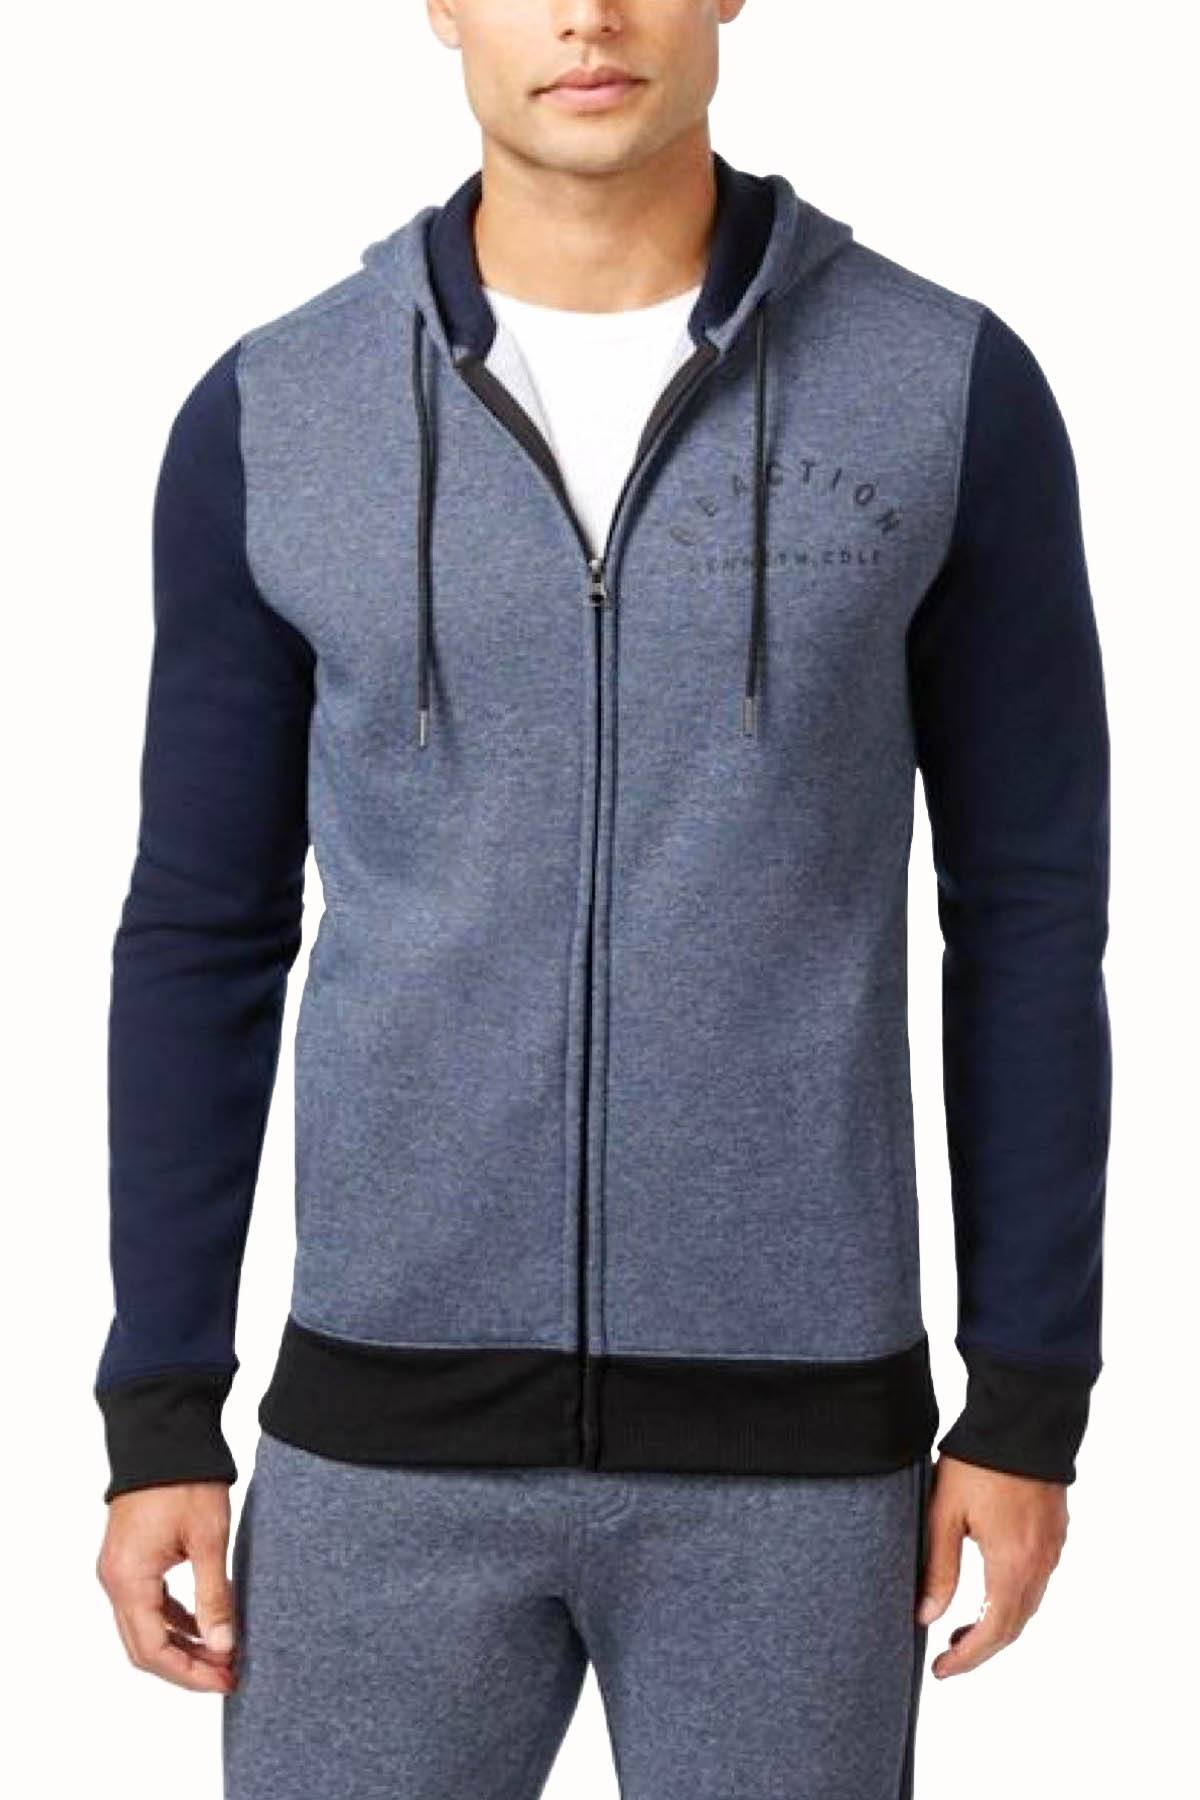 Kenneth Cole Reaction Indigo-Heather Downtime Marled Zip-Hoodie